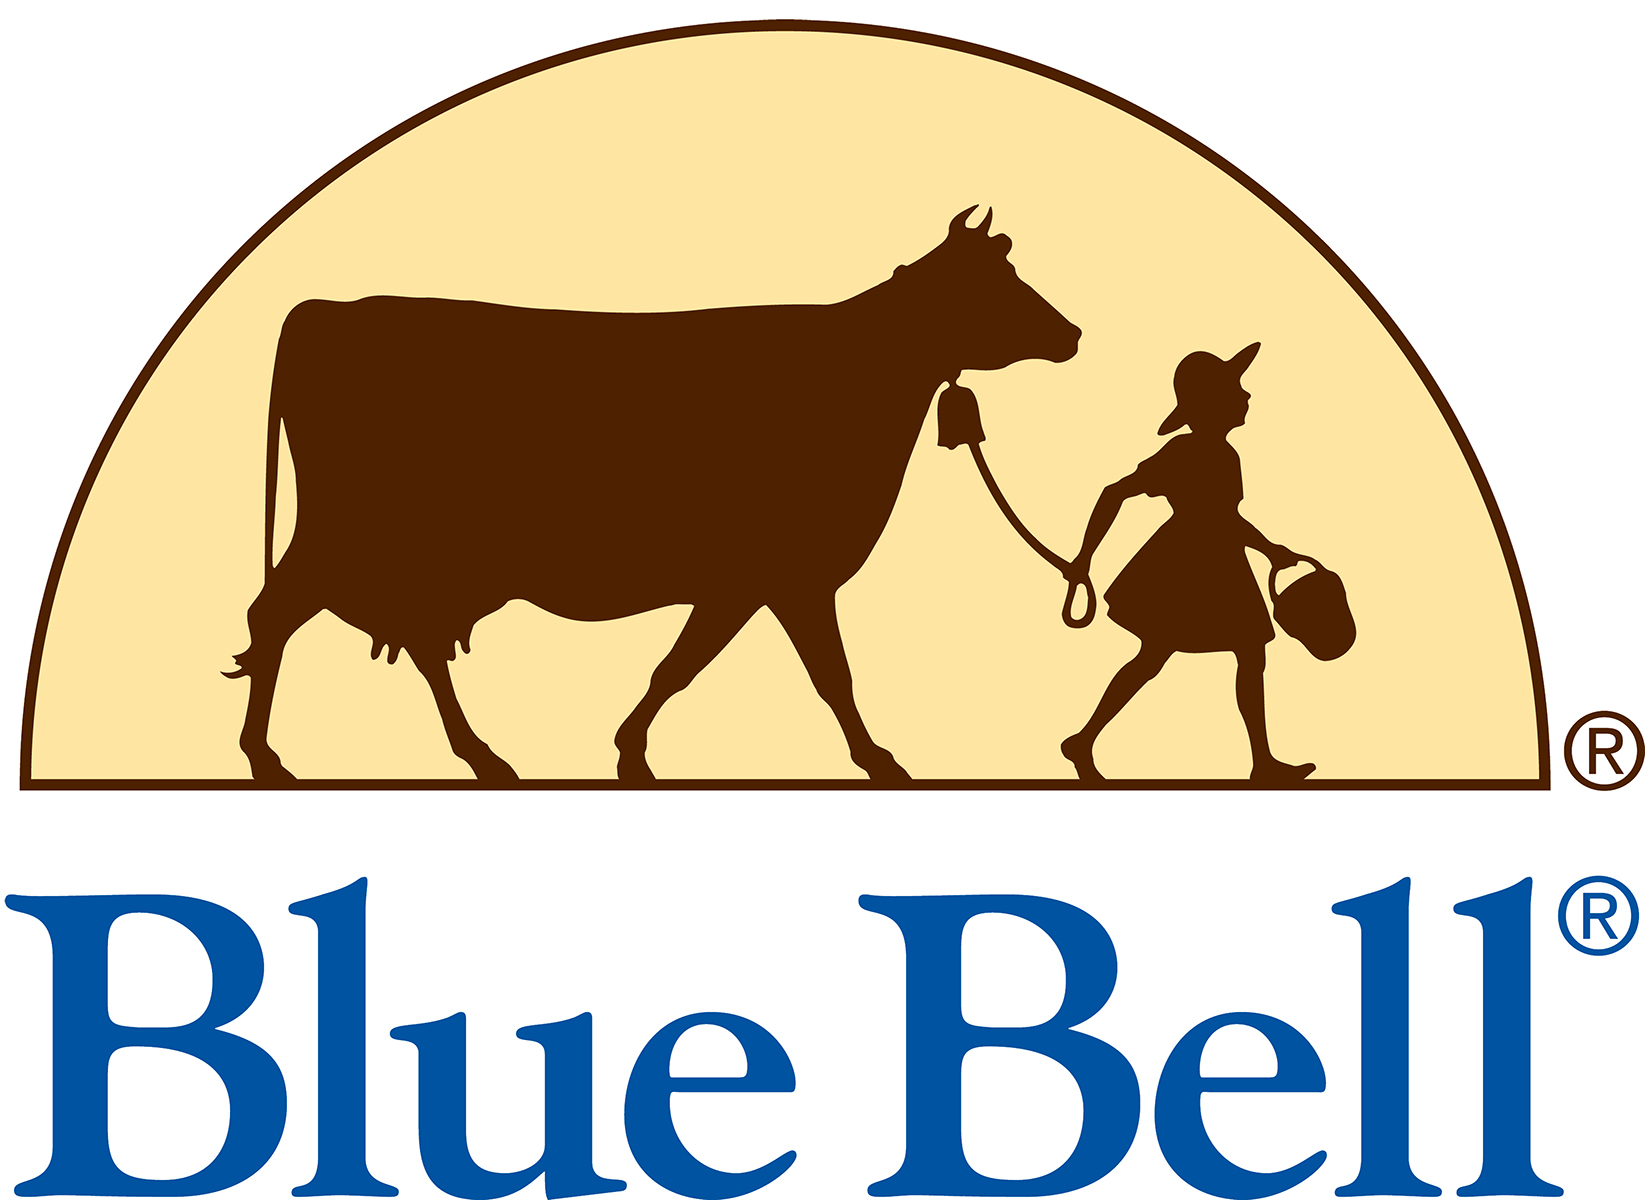 Texas Creamery Blue Bell to Plead Guilty, Pay 19M over Listeria Outbreak